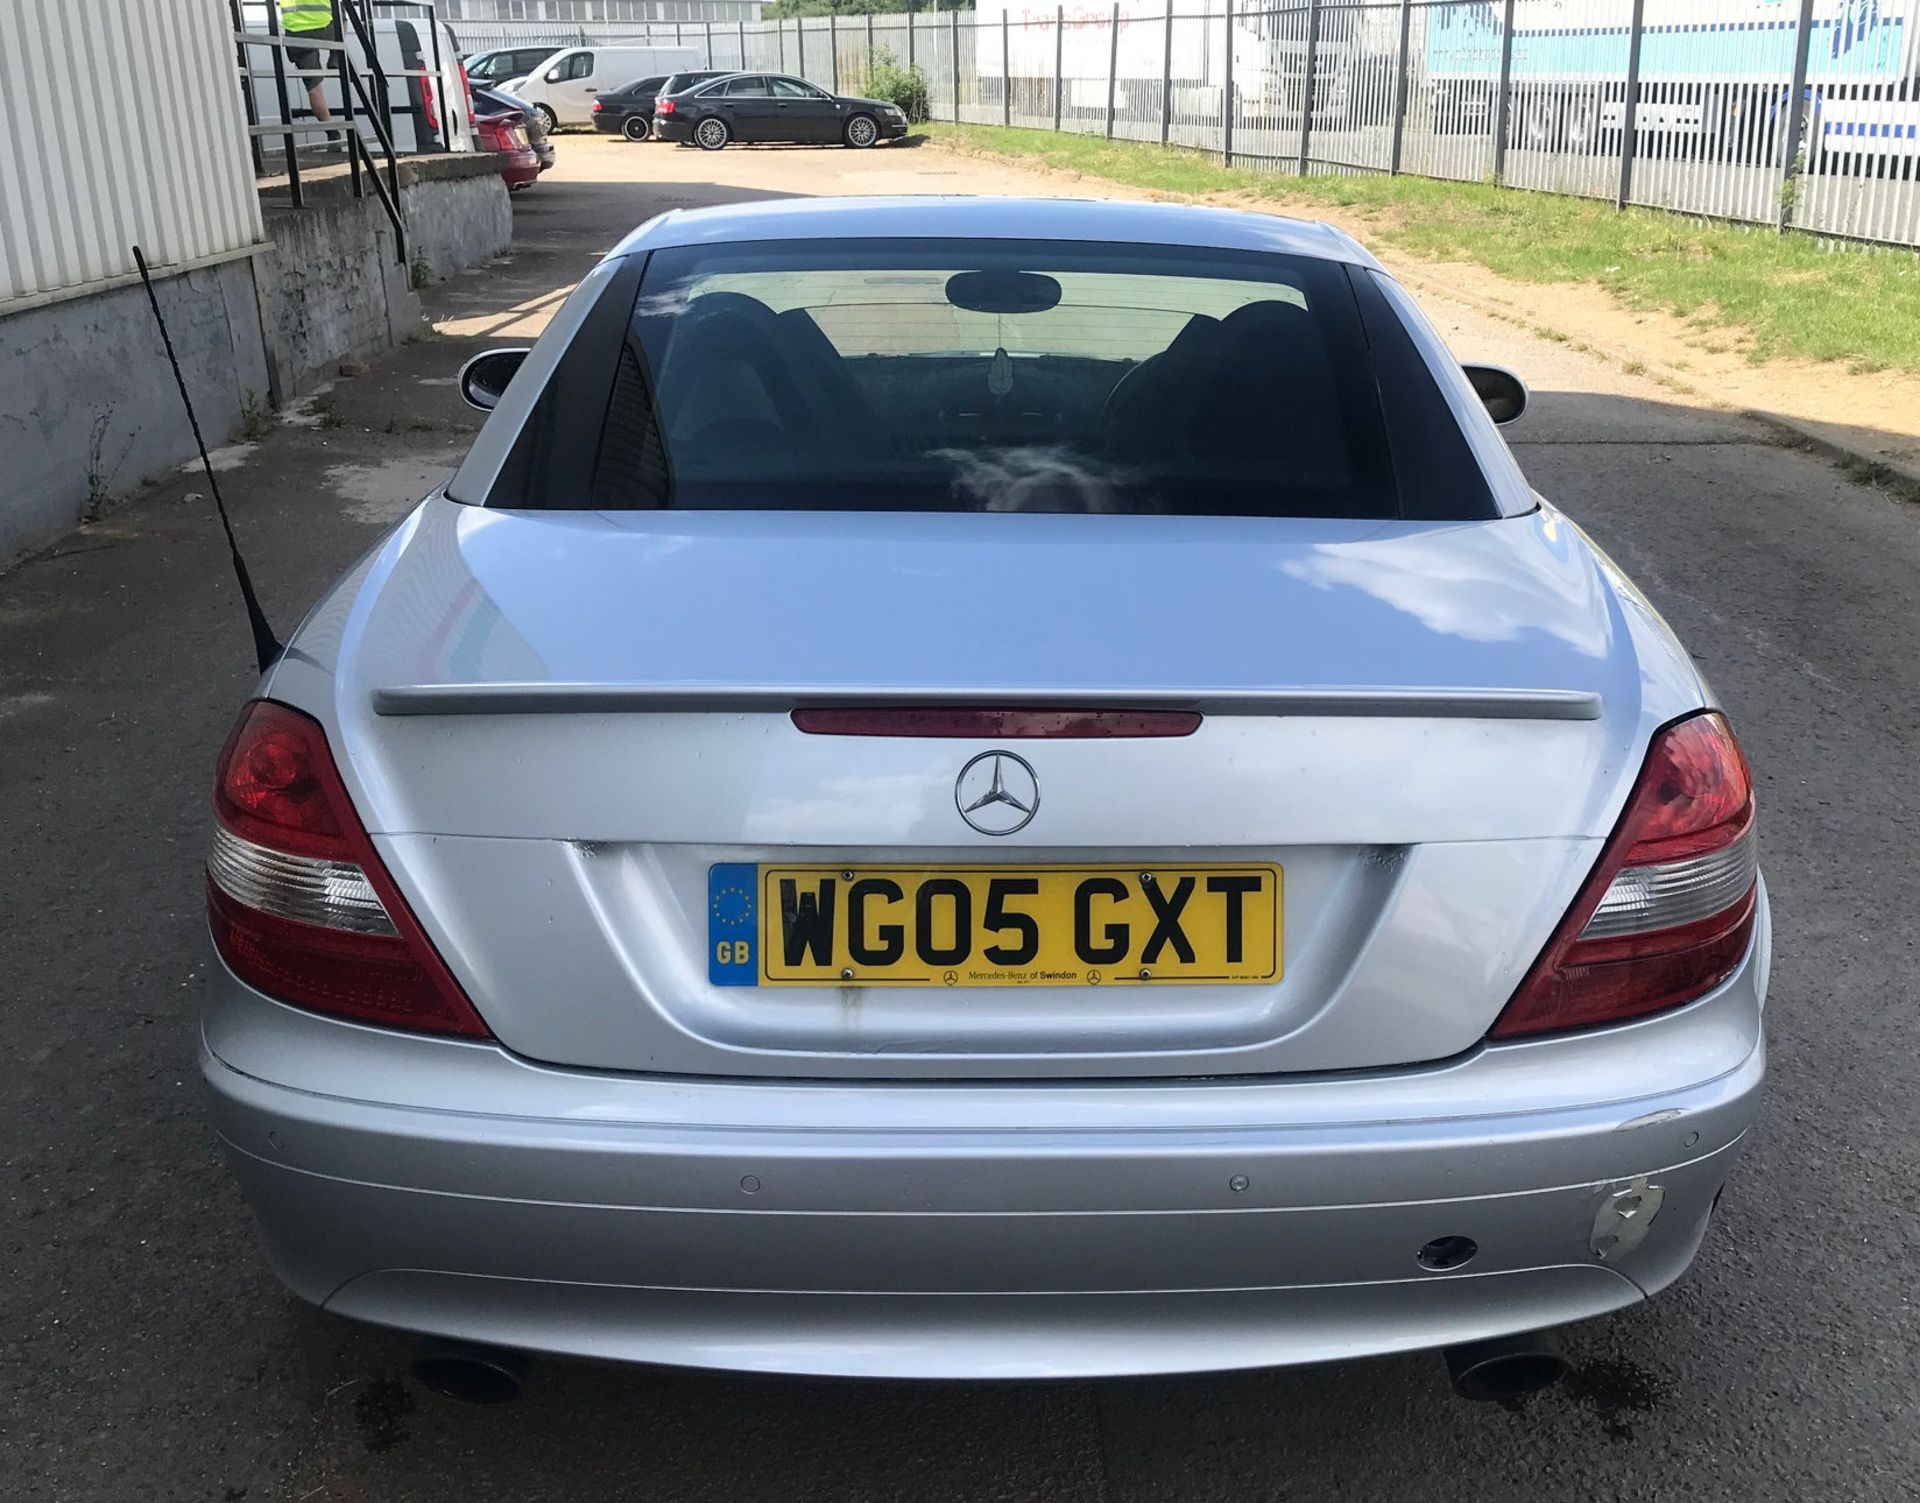 2005 Mercedes SLK 350 2 Dr Convertible - CL505 - NO VAT ON THE HAMMER - Location: Corby, N - Image 9 of 18